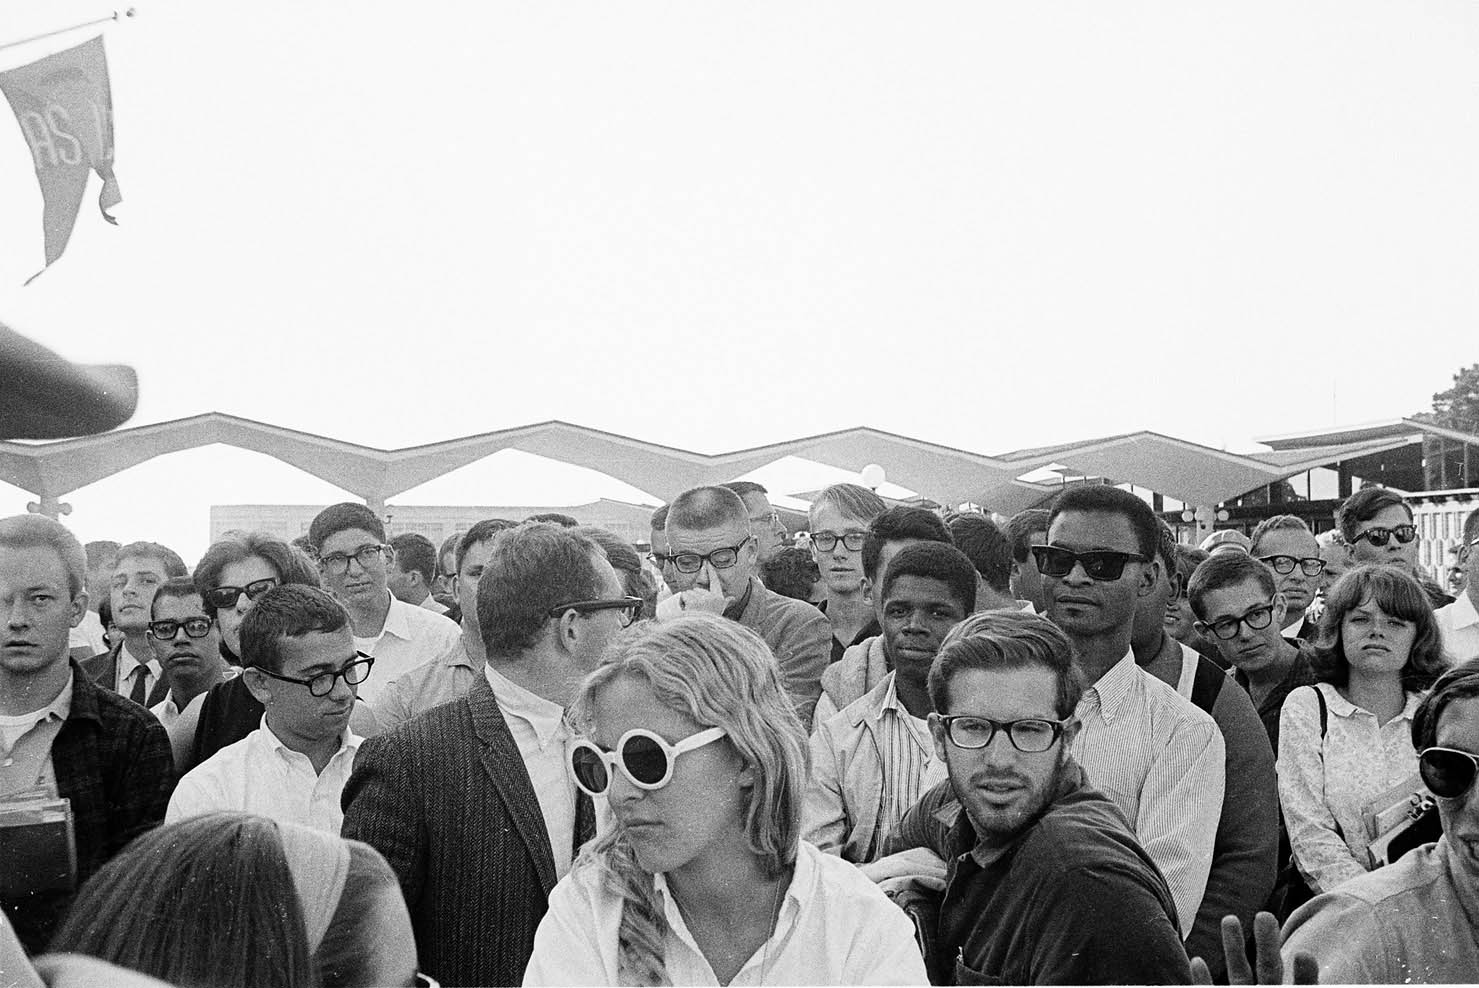 Steven Marcus, The Crowd in Sproul Plaza 10-1-1964